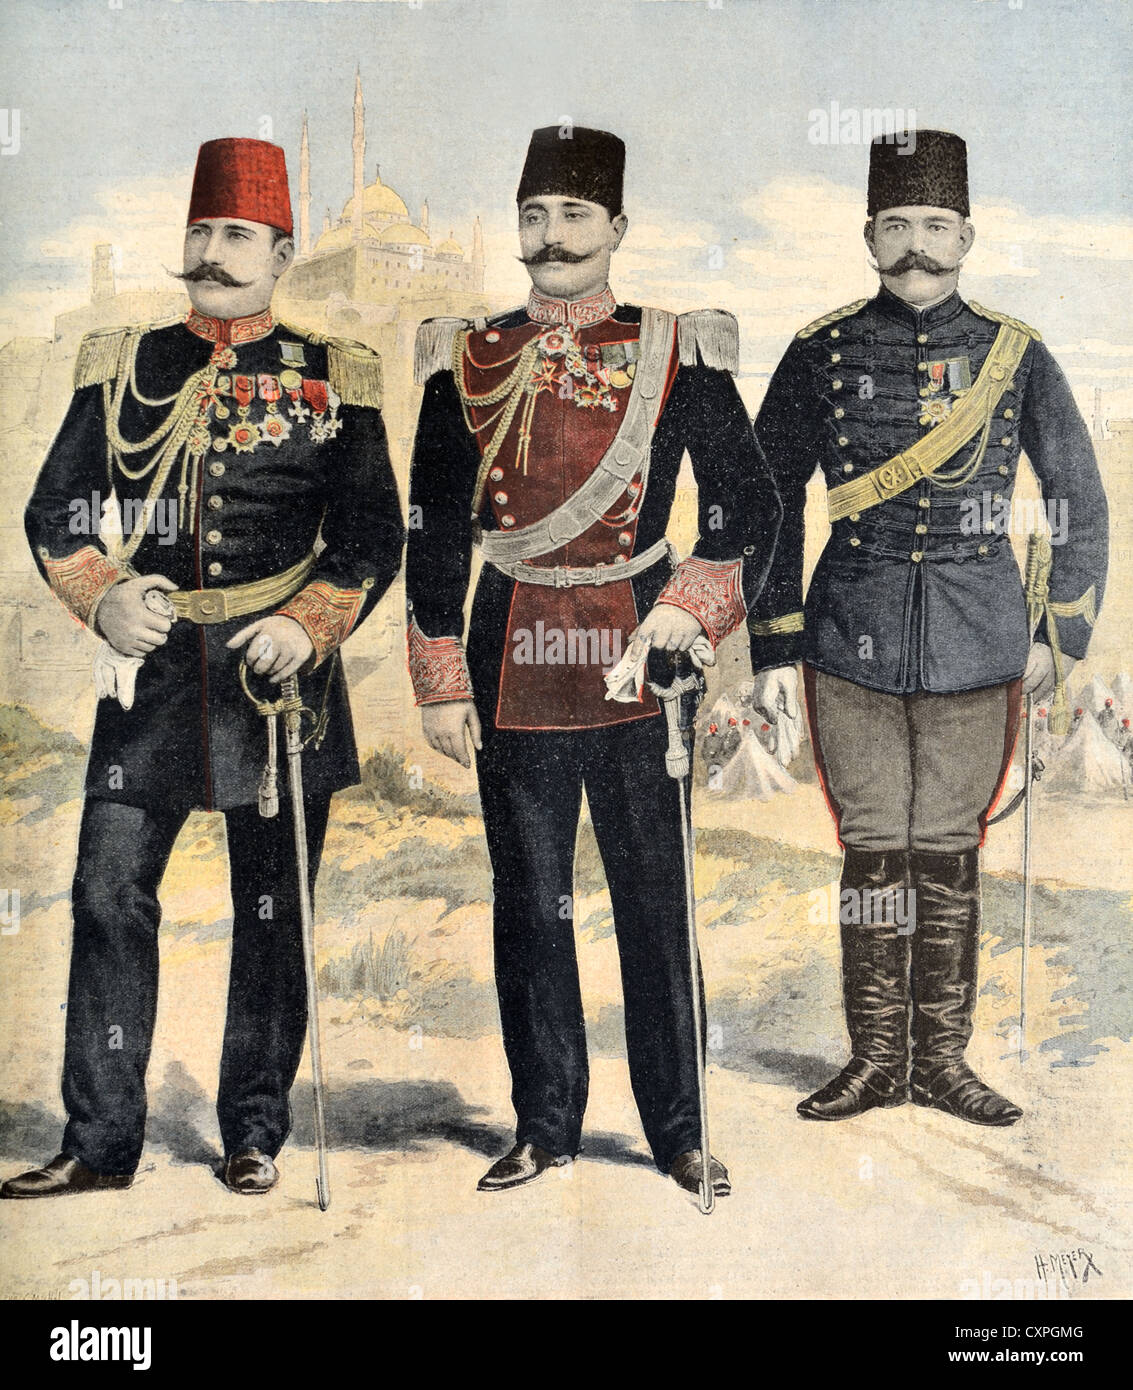 Ottoman Army Officers incl Young Turk Ahmed Riza Bey (centre). Vintage Illustration or Old Engraving Stock Photo